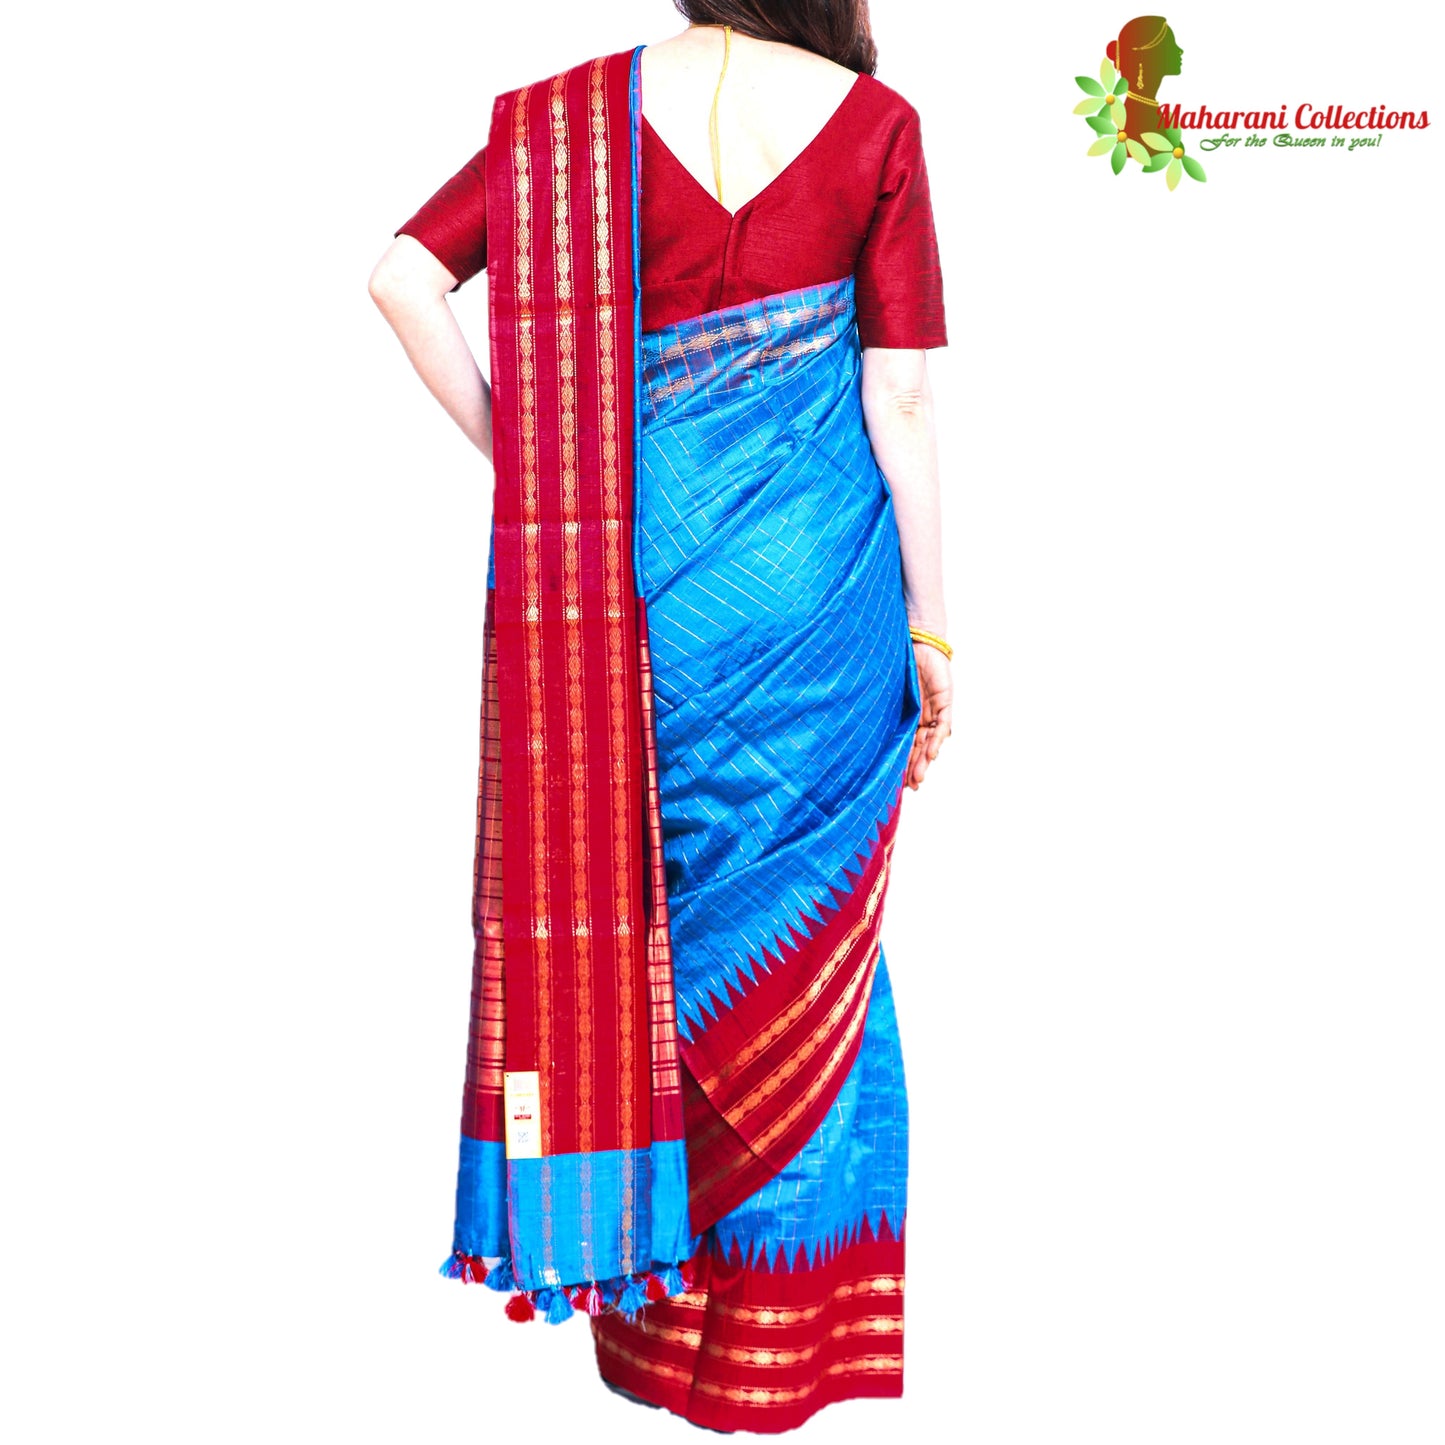 Pure Handloom Tussar Silk Saree - Striped Red and Blue with Golden Zari Work and Temple Border